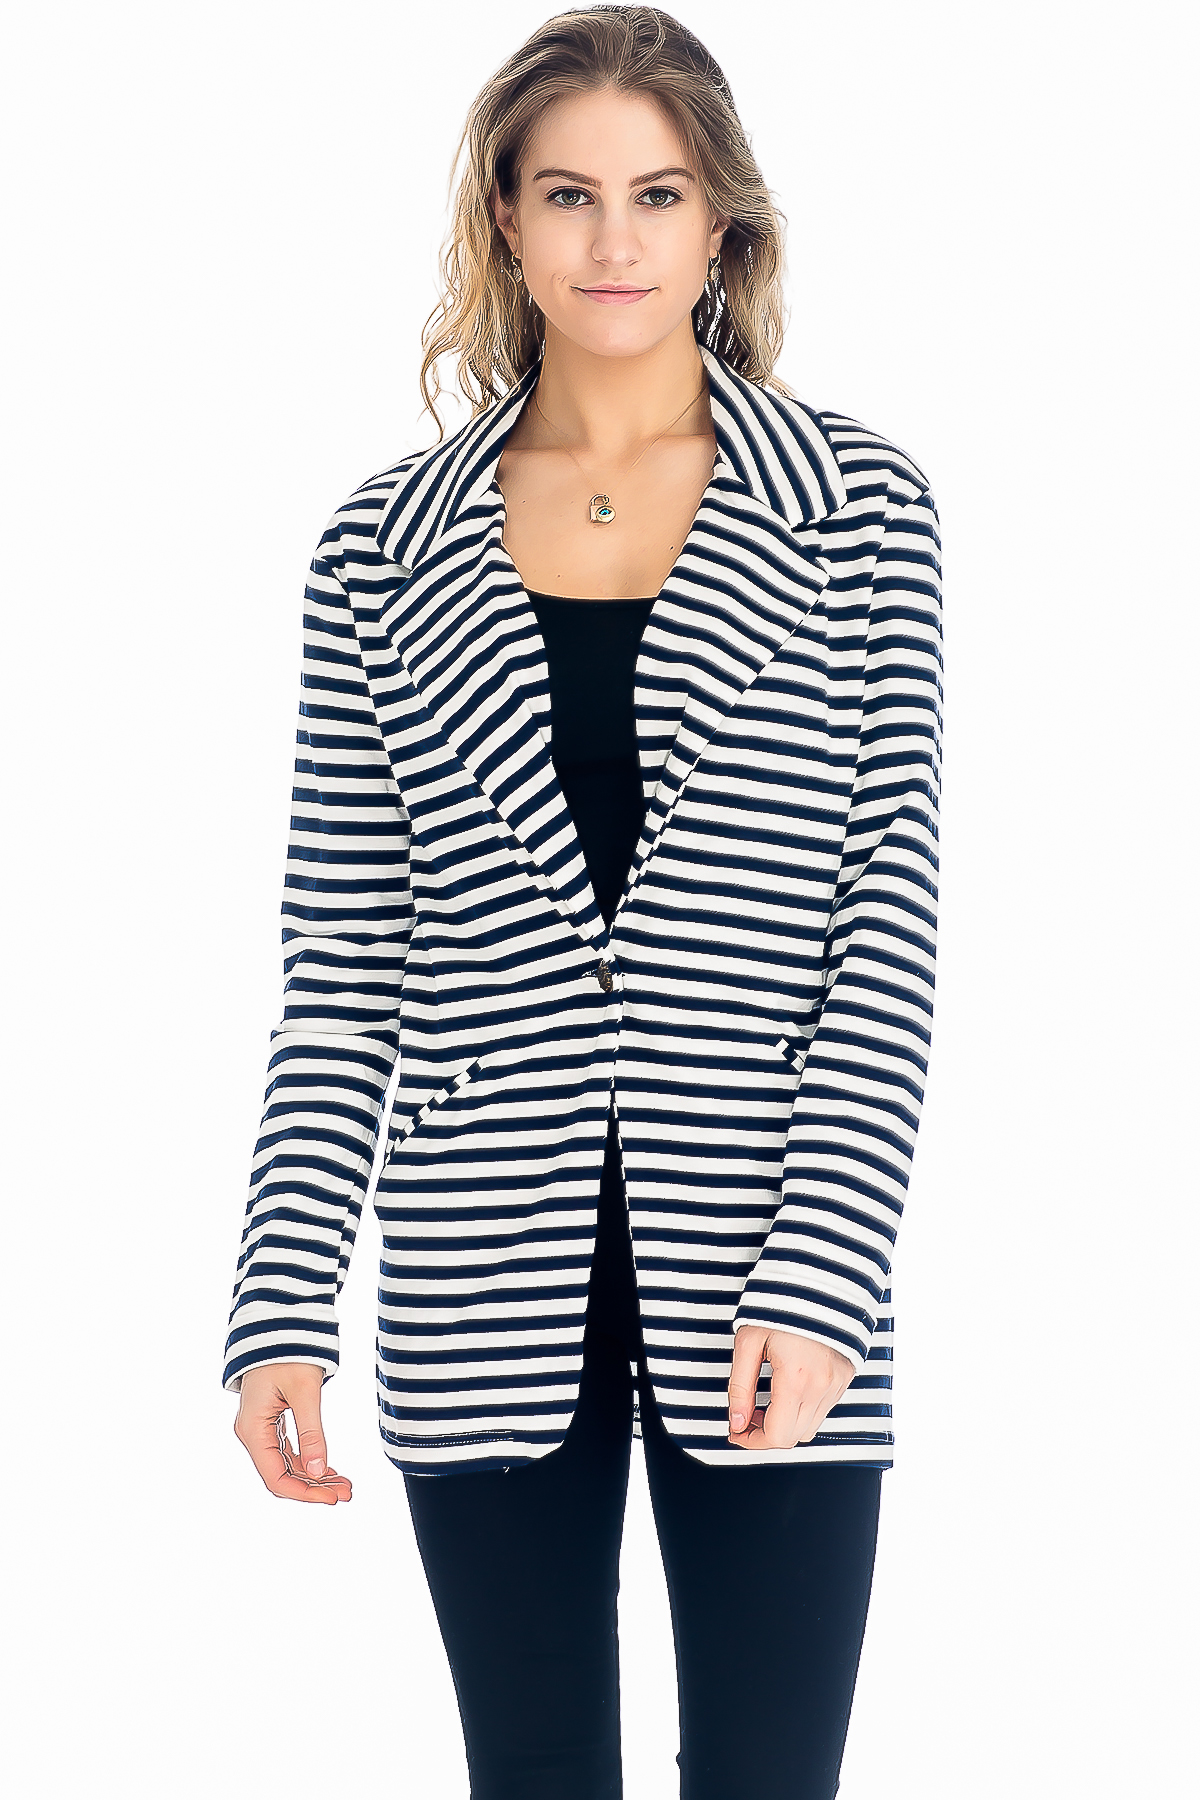 Style It With Stripes From House of Baciano - It's A Glam Thing